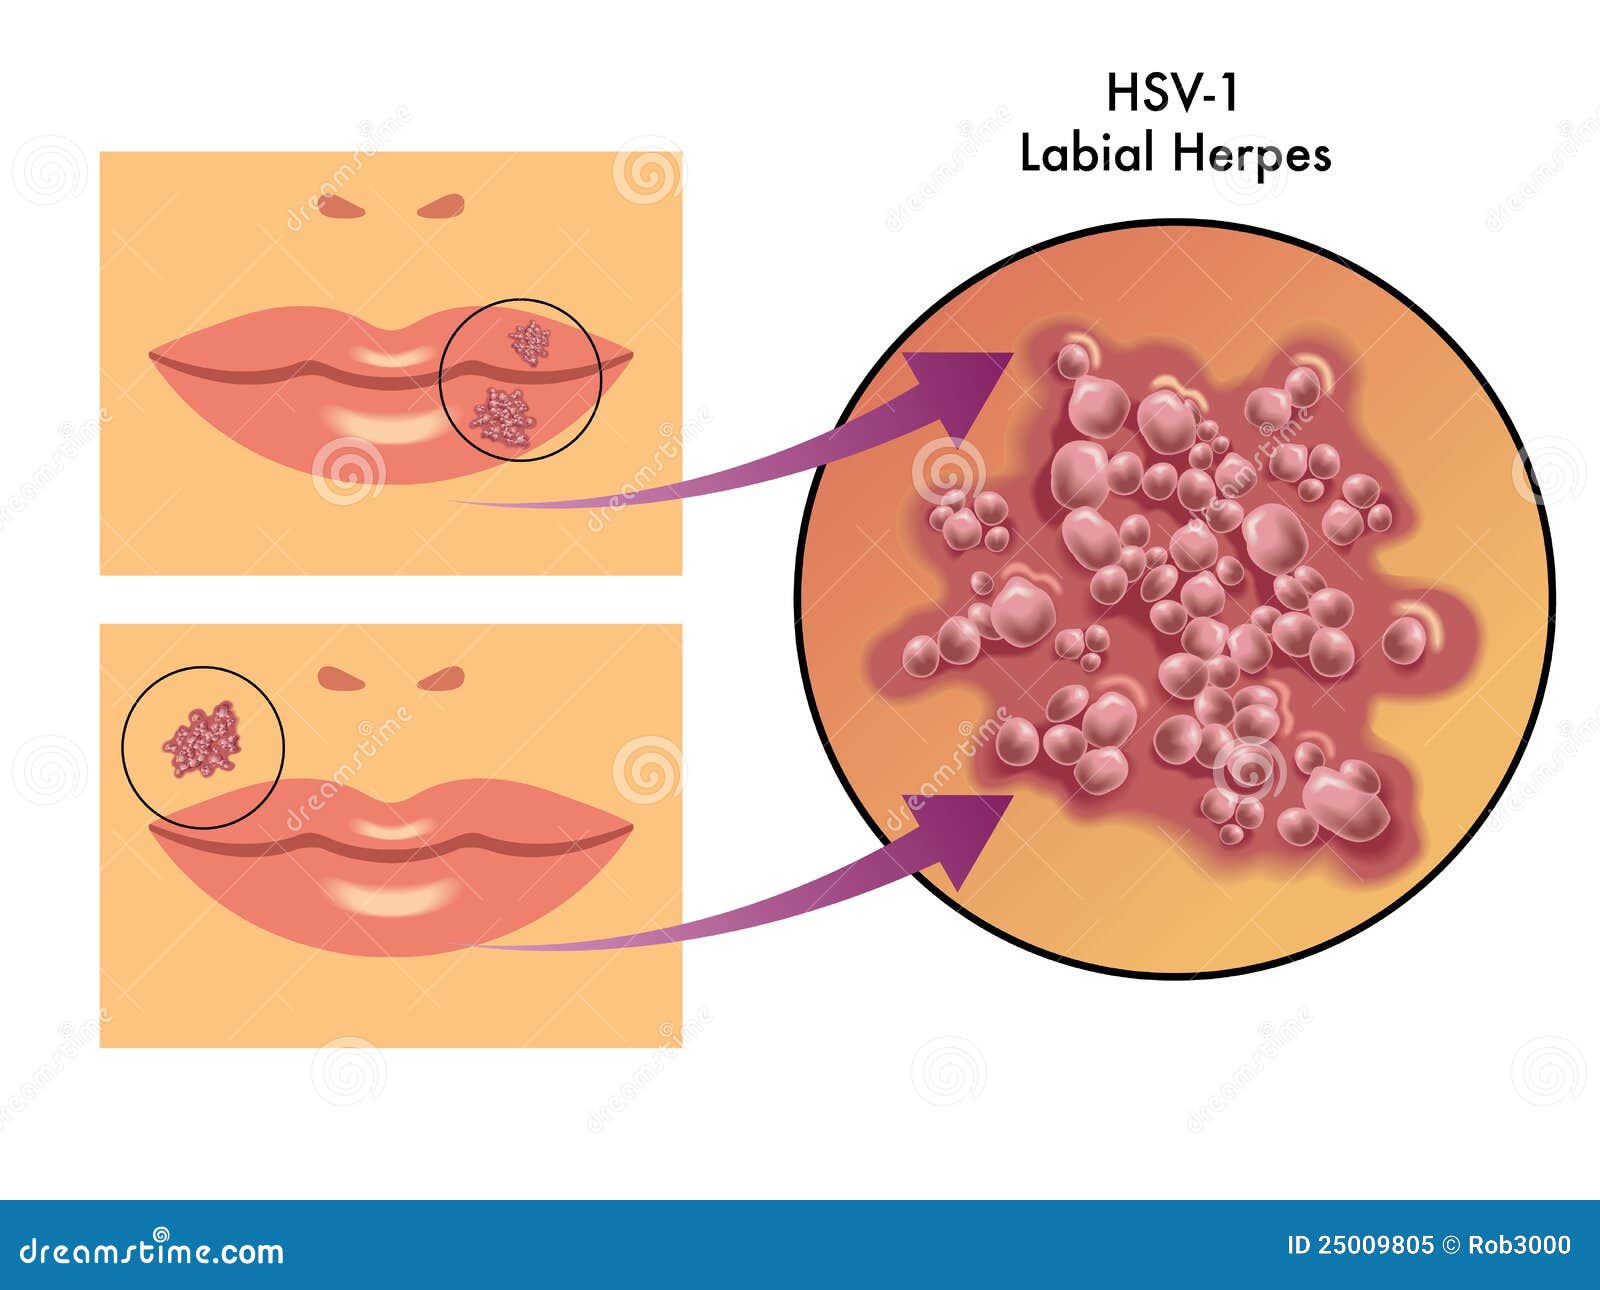 Herpes Simplex Picture - Herpes Pictures